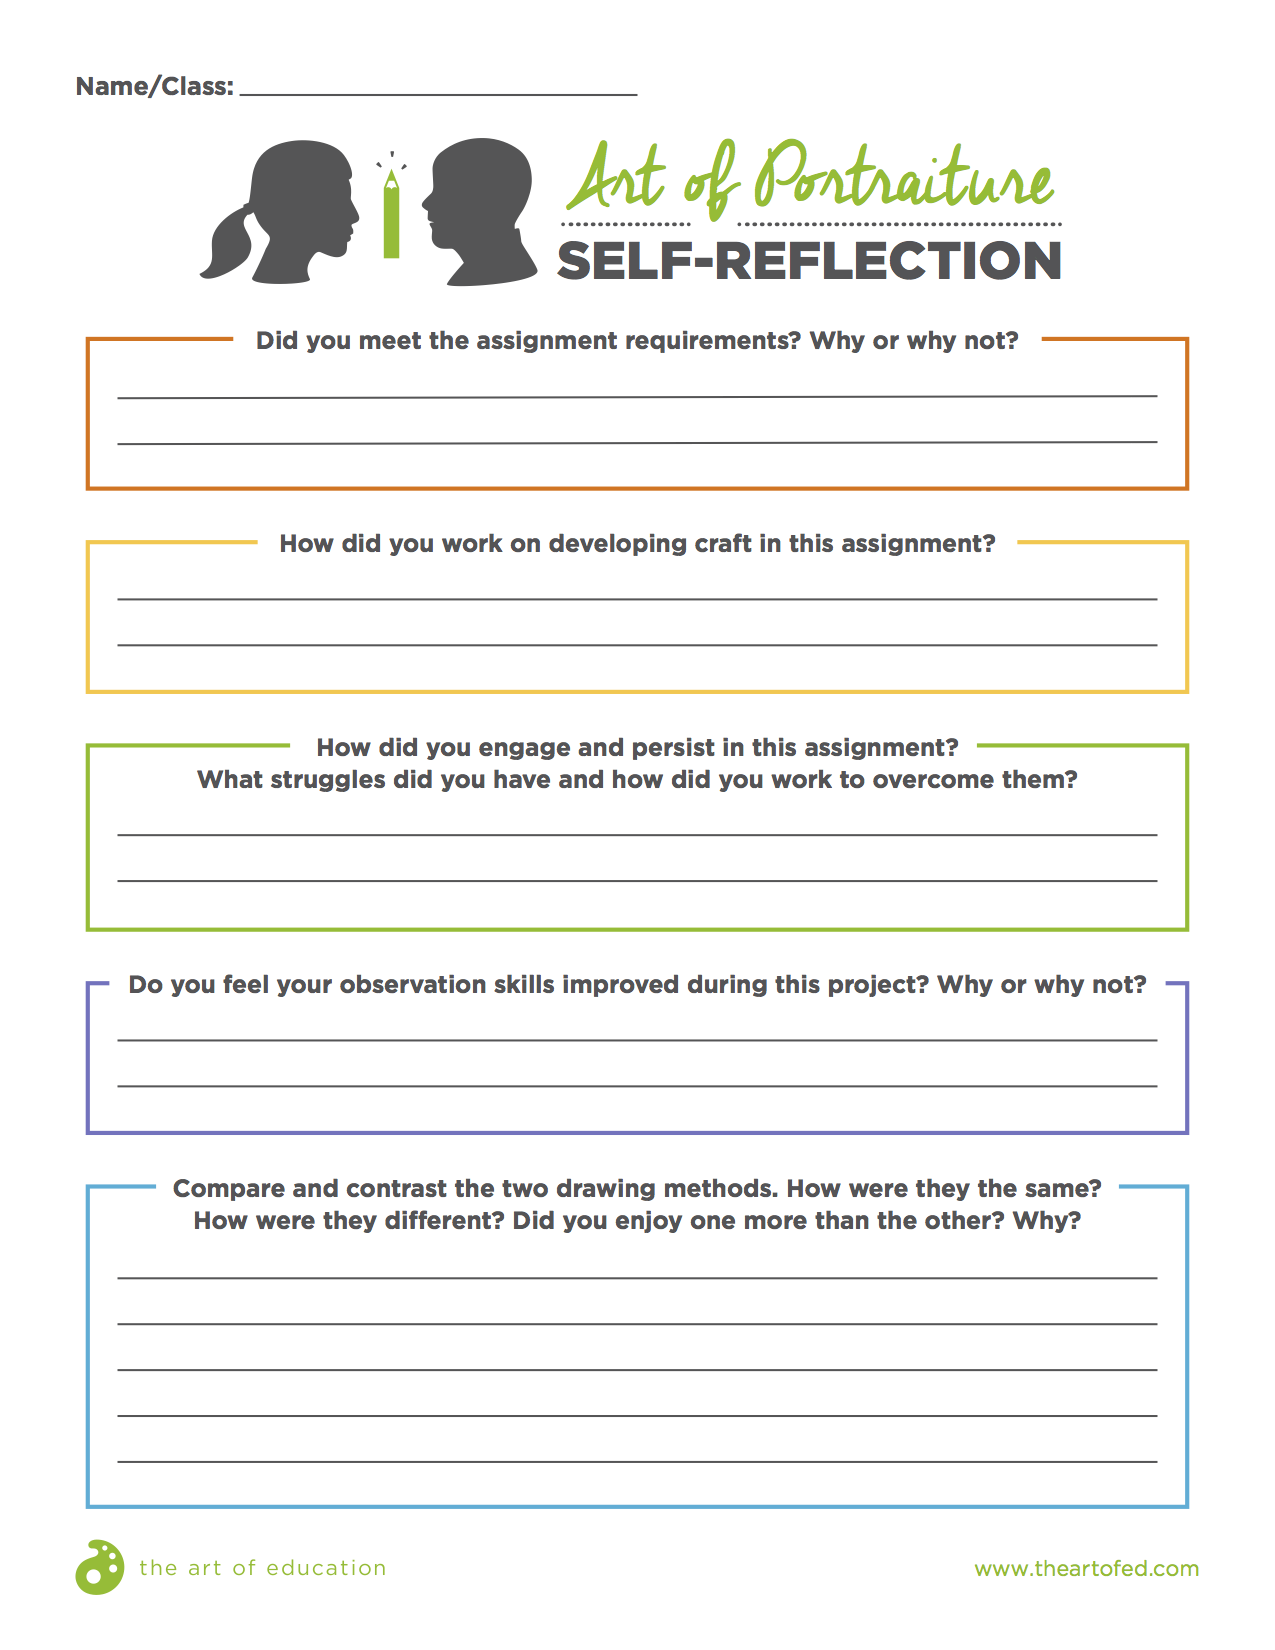 self-reflection download